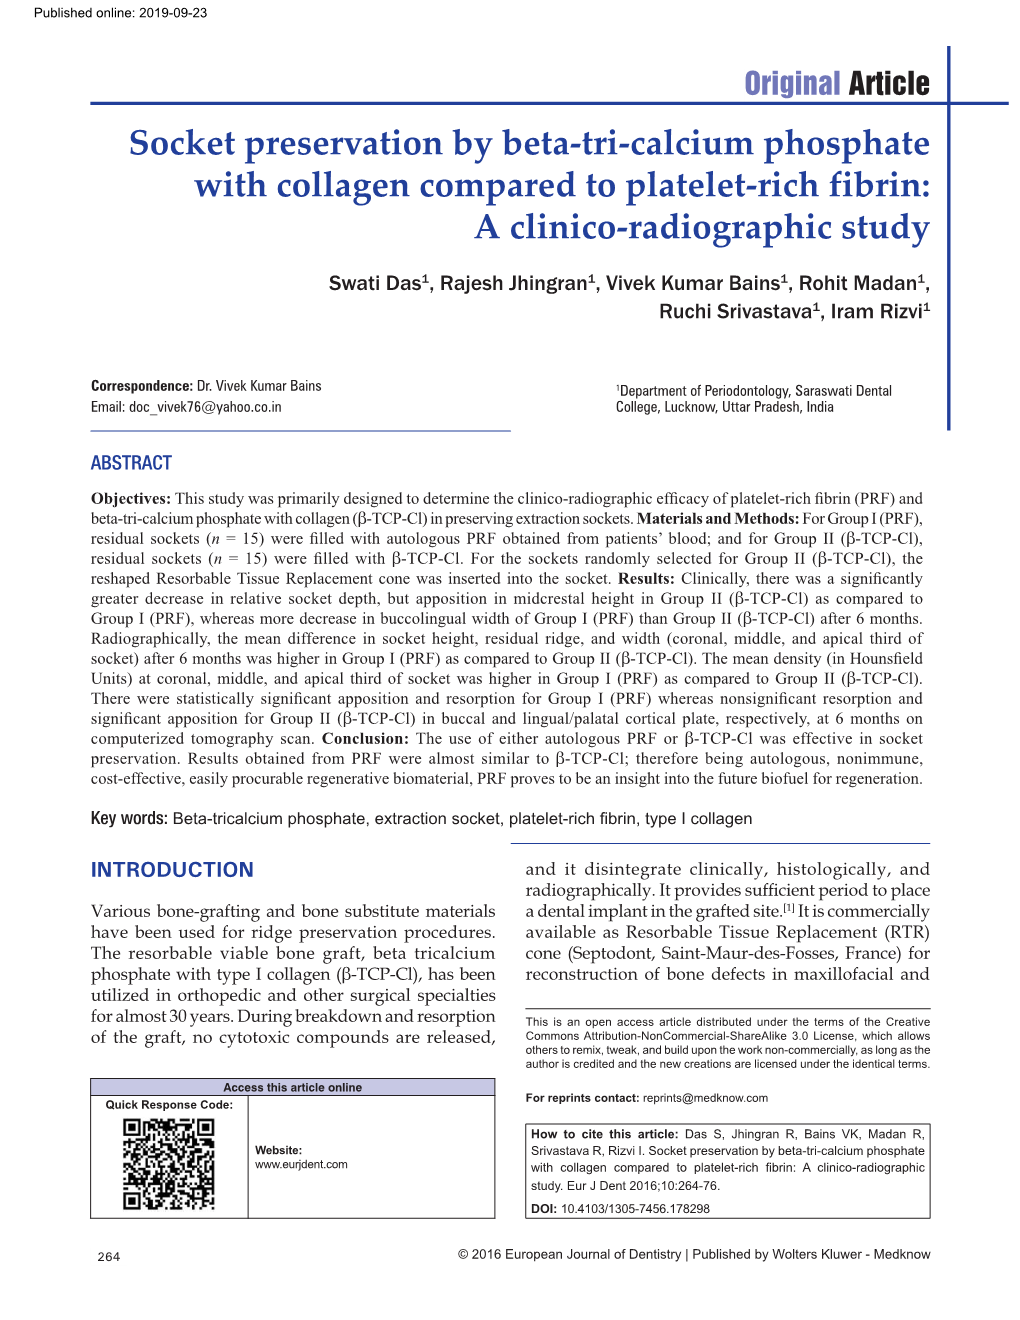 Socket Preservation by Beta‑Tri‑Calcium Phosphate with Collagen Compared to Platelet‑Rich Fibrin: a Clinico‑Radiographic Study